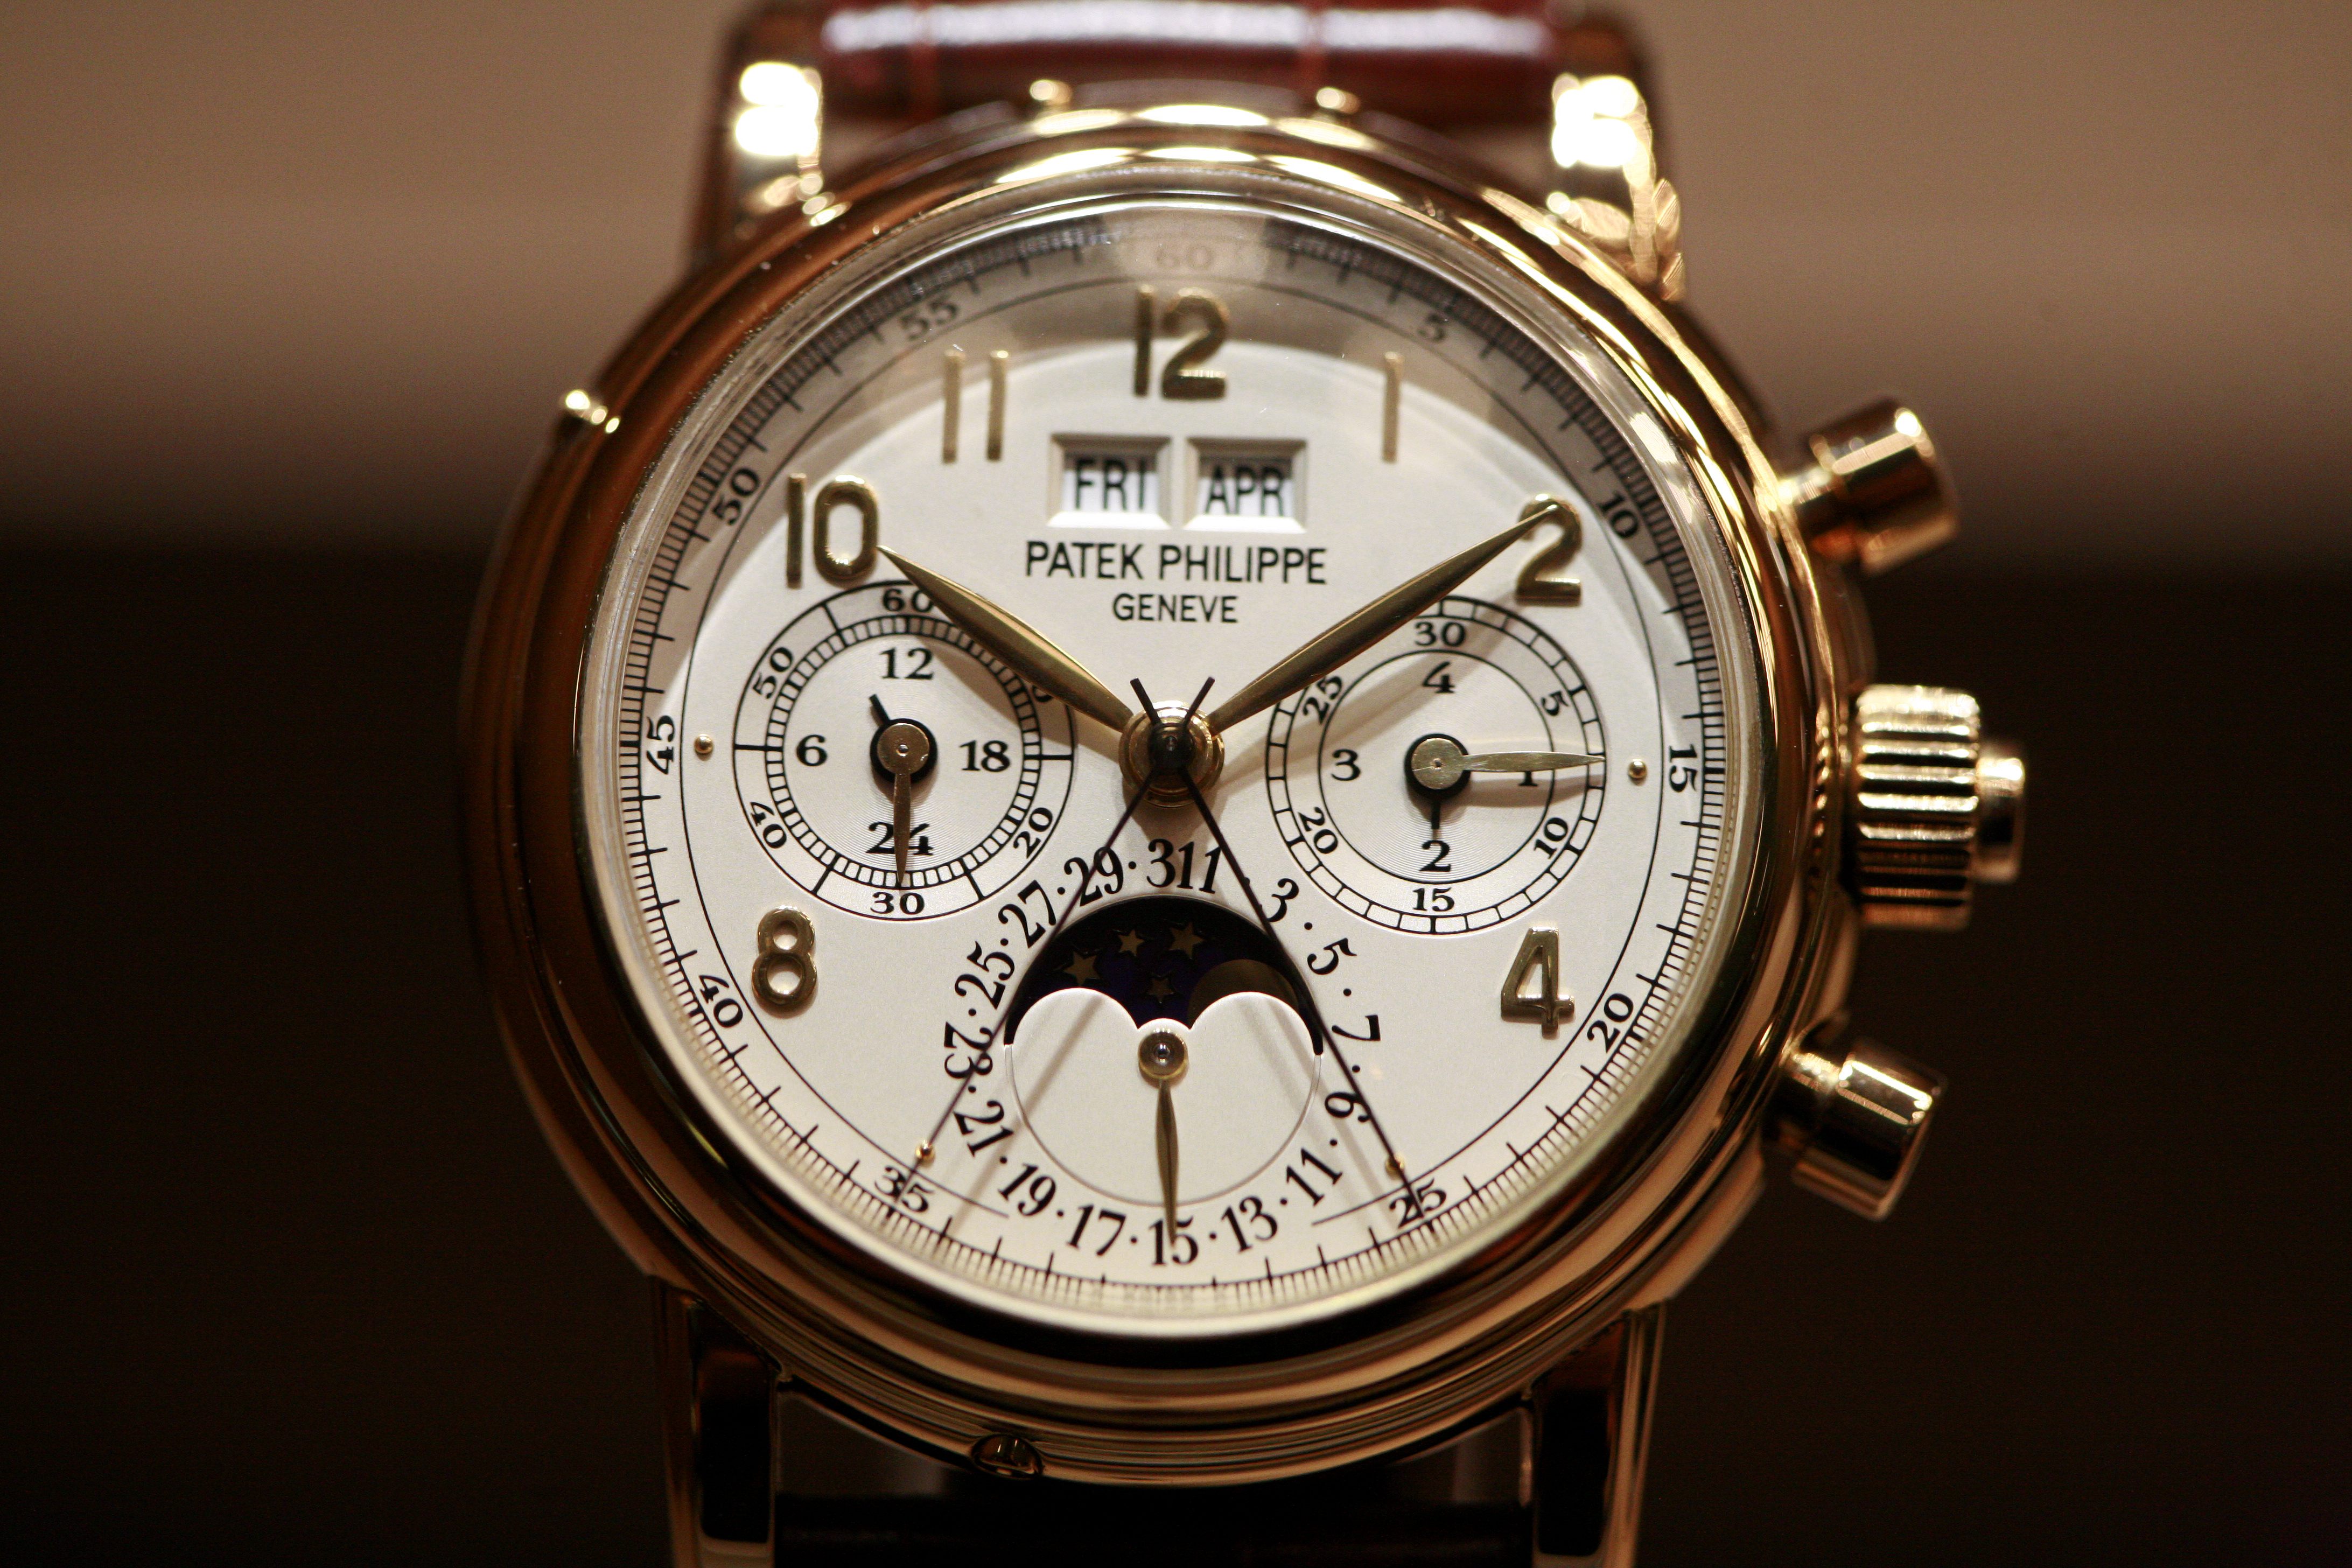 Considerations for Making an Informed Decision: Is Patek Philippe Worth the Price?